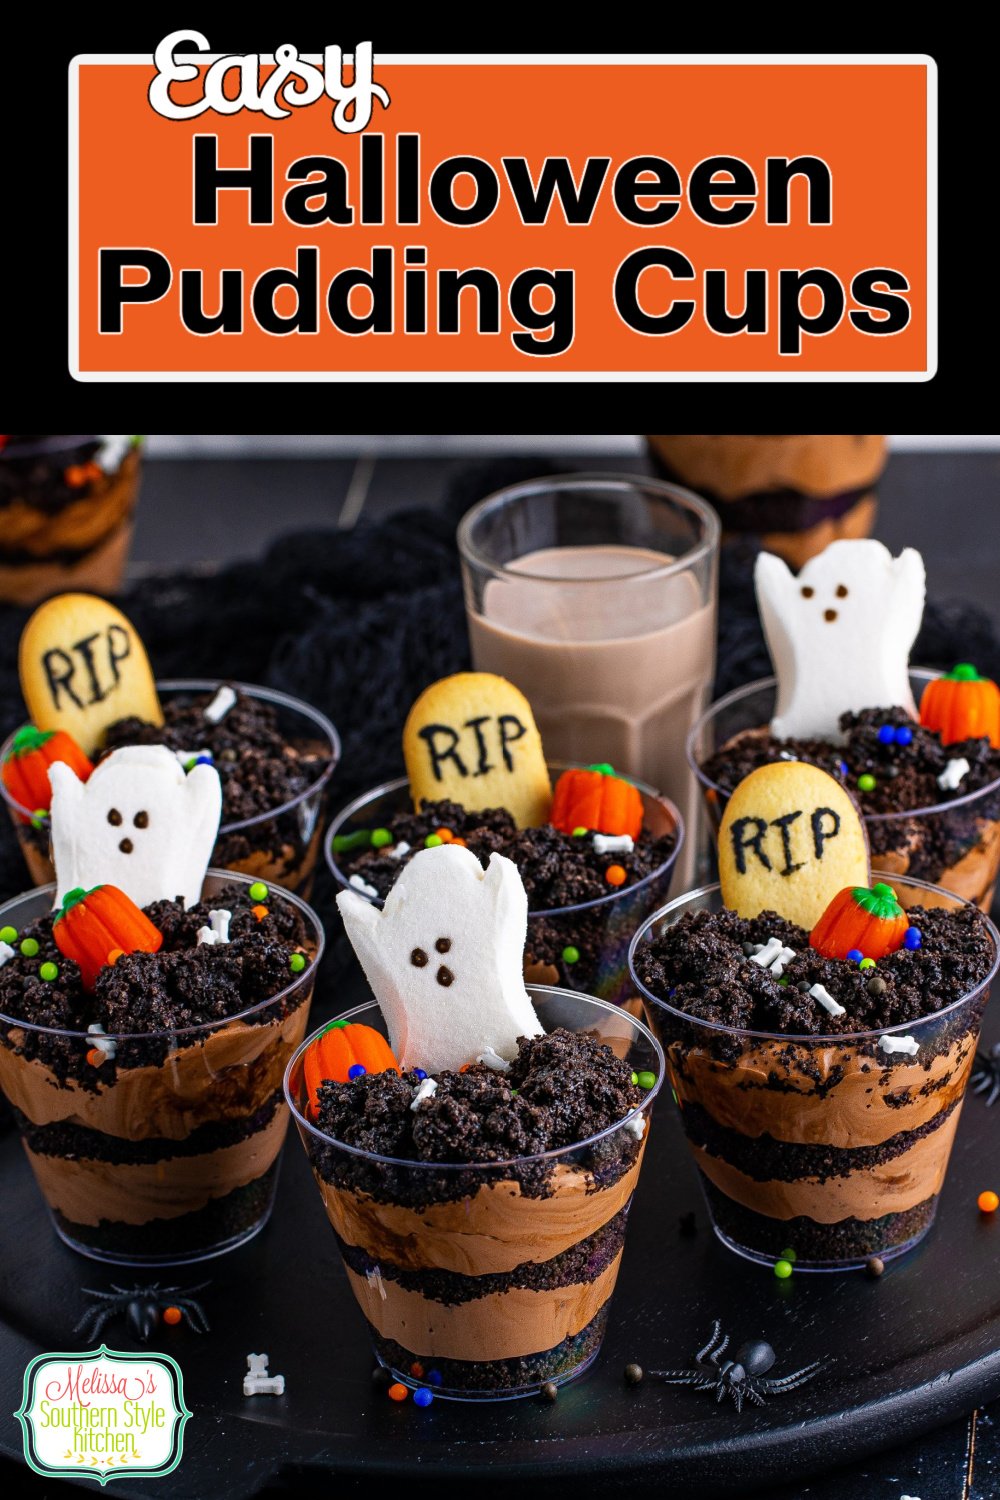 These Halloween Pudding Cups are a fun and delicious option for the tiny ghosts and goblins to make and enjoy! #dirtcups #chocolatepudding #chocolatepuddingcups #oreodirtcups #puddingrecipes #chocolatedesserts #halloweendesserts #halloweendessertrecipes via @melissasssk